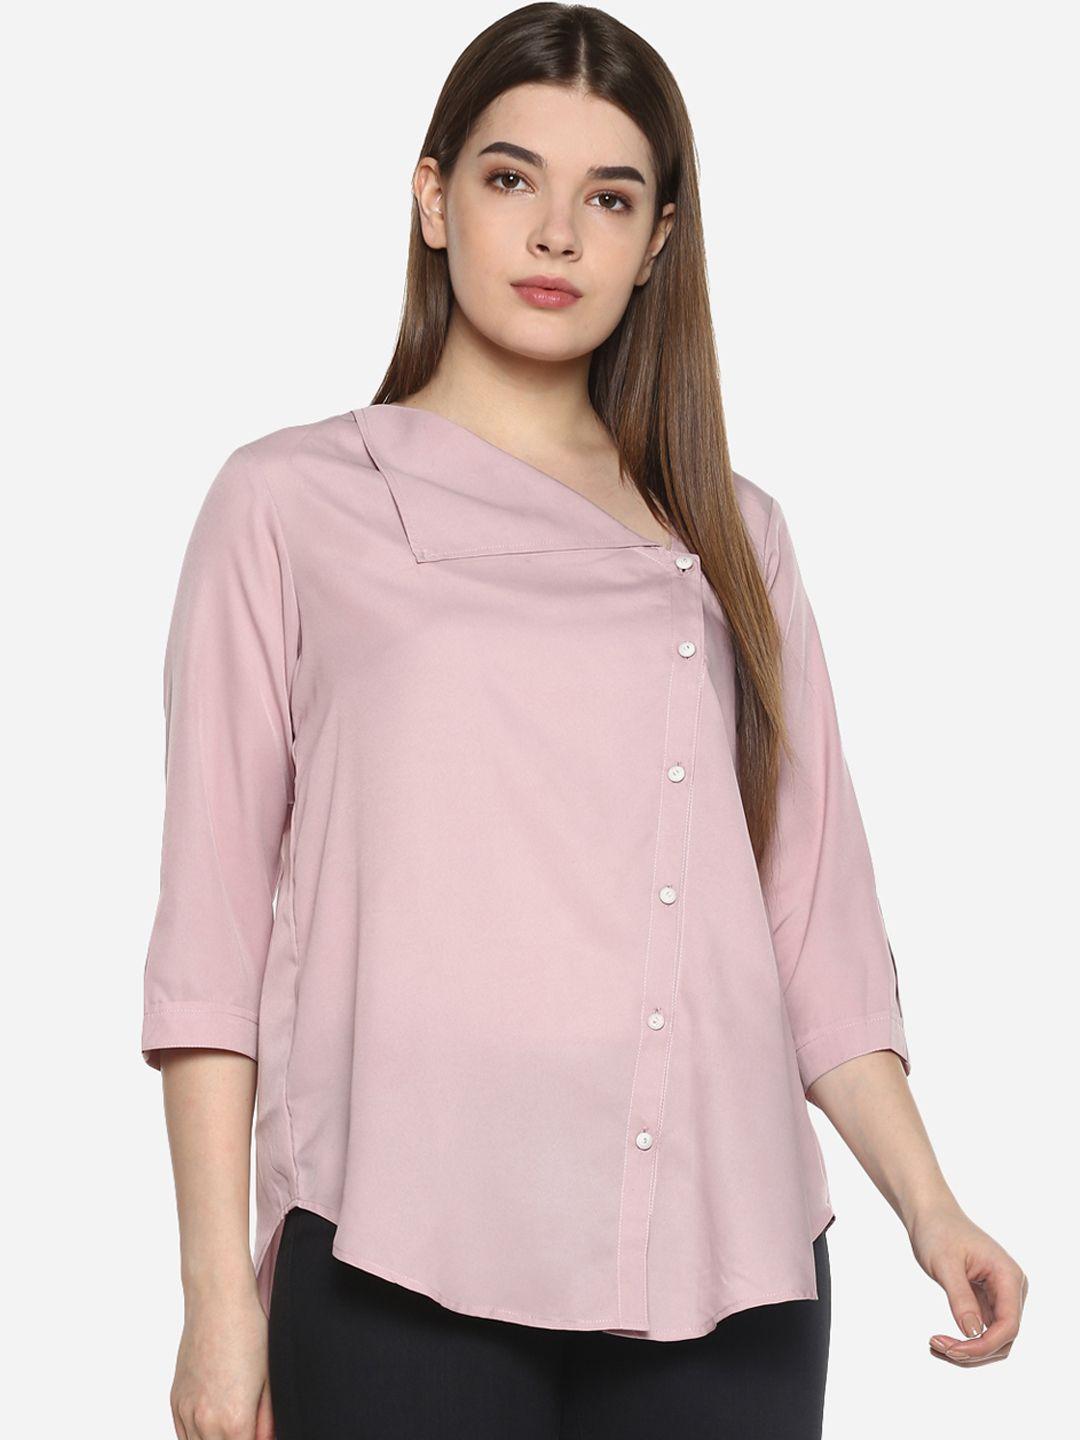 qurvii plus size women pink regular fit solid casual shirt